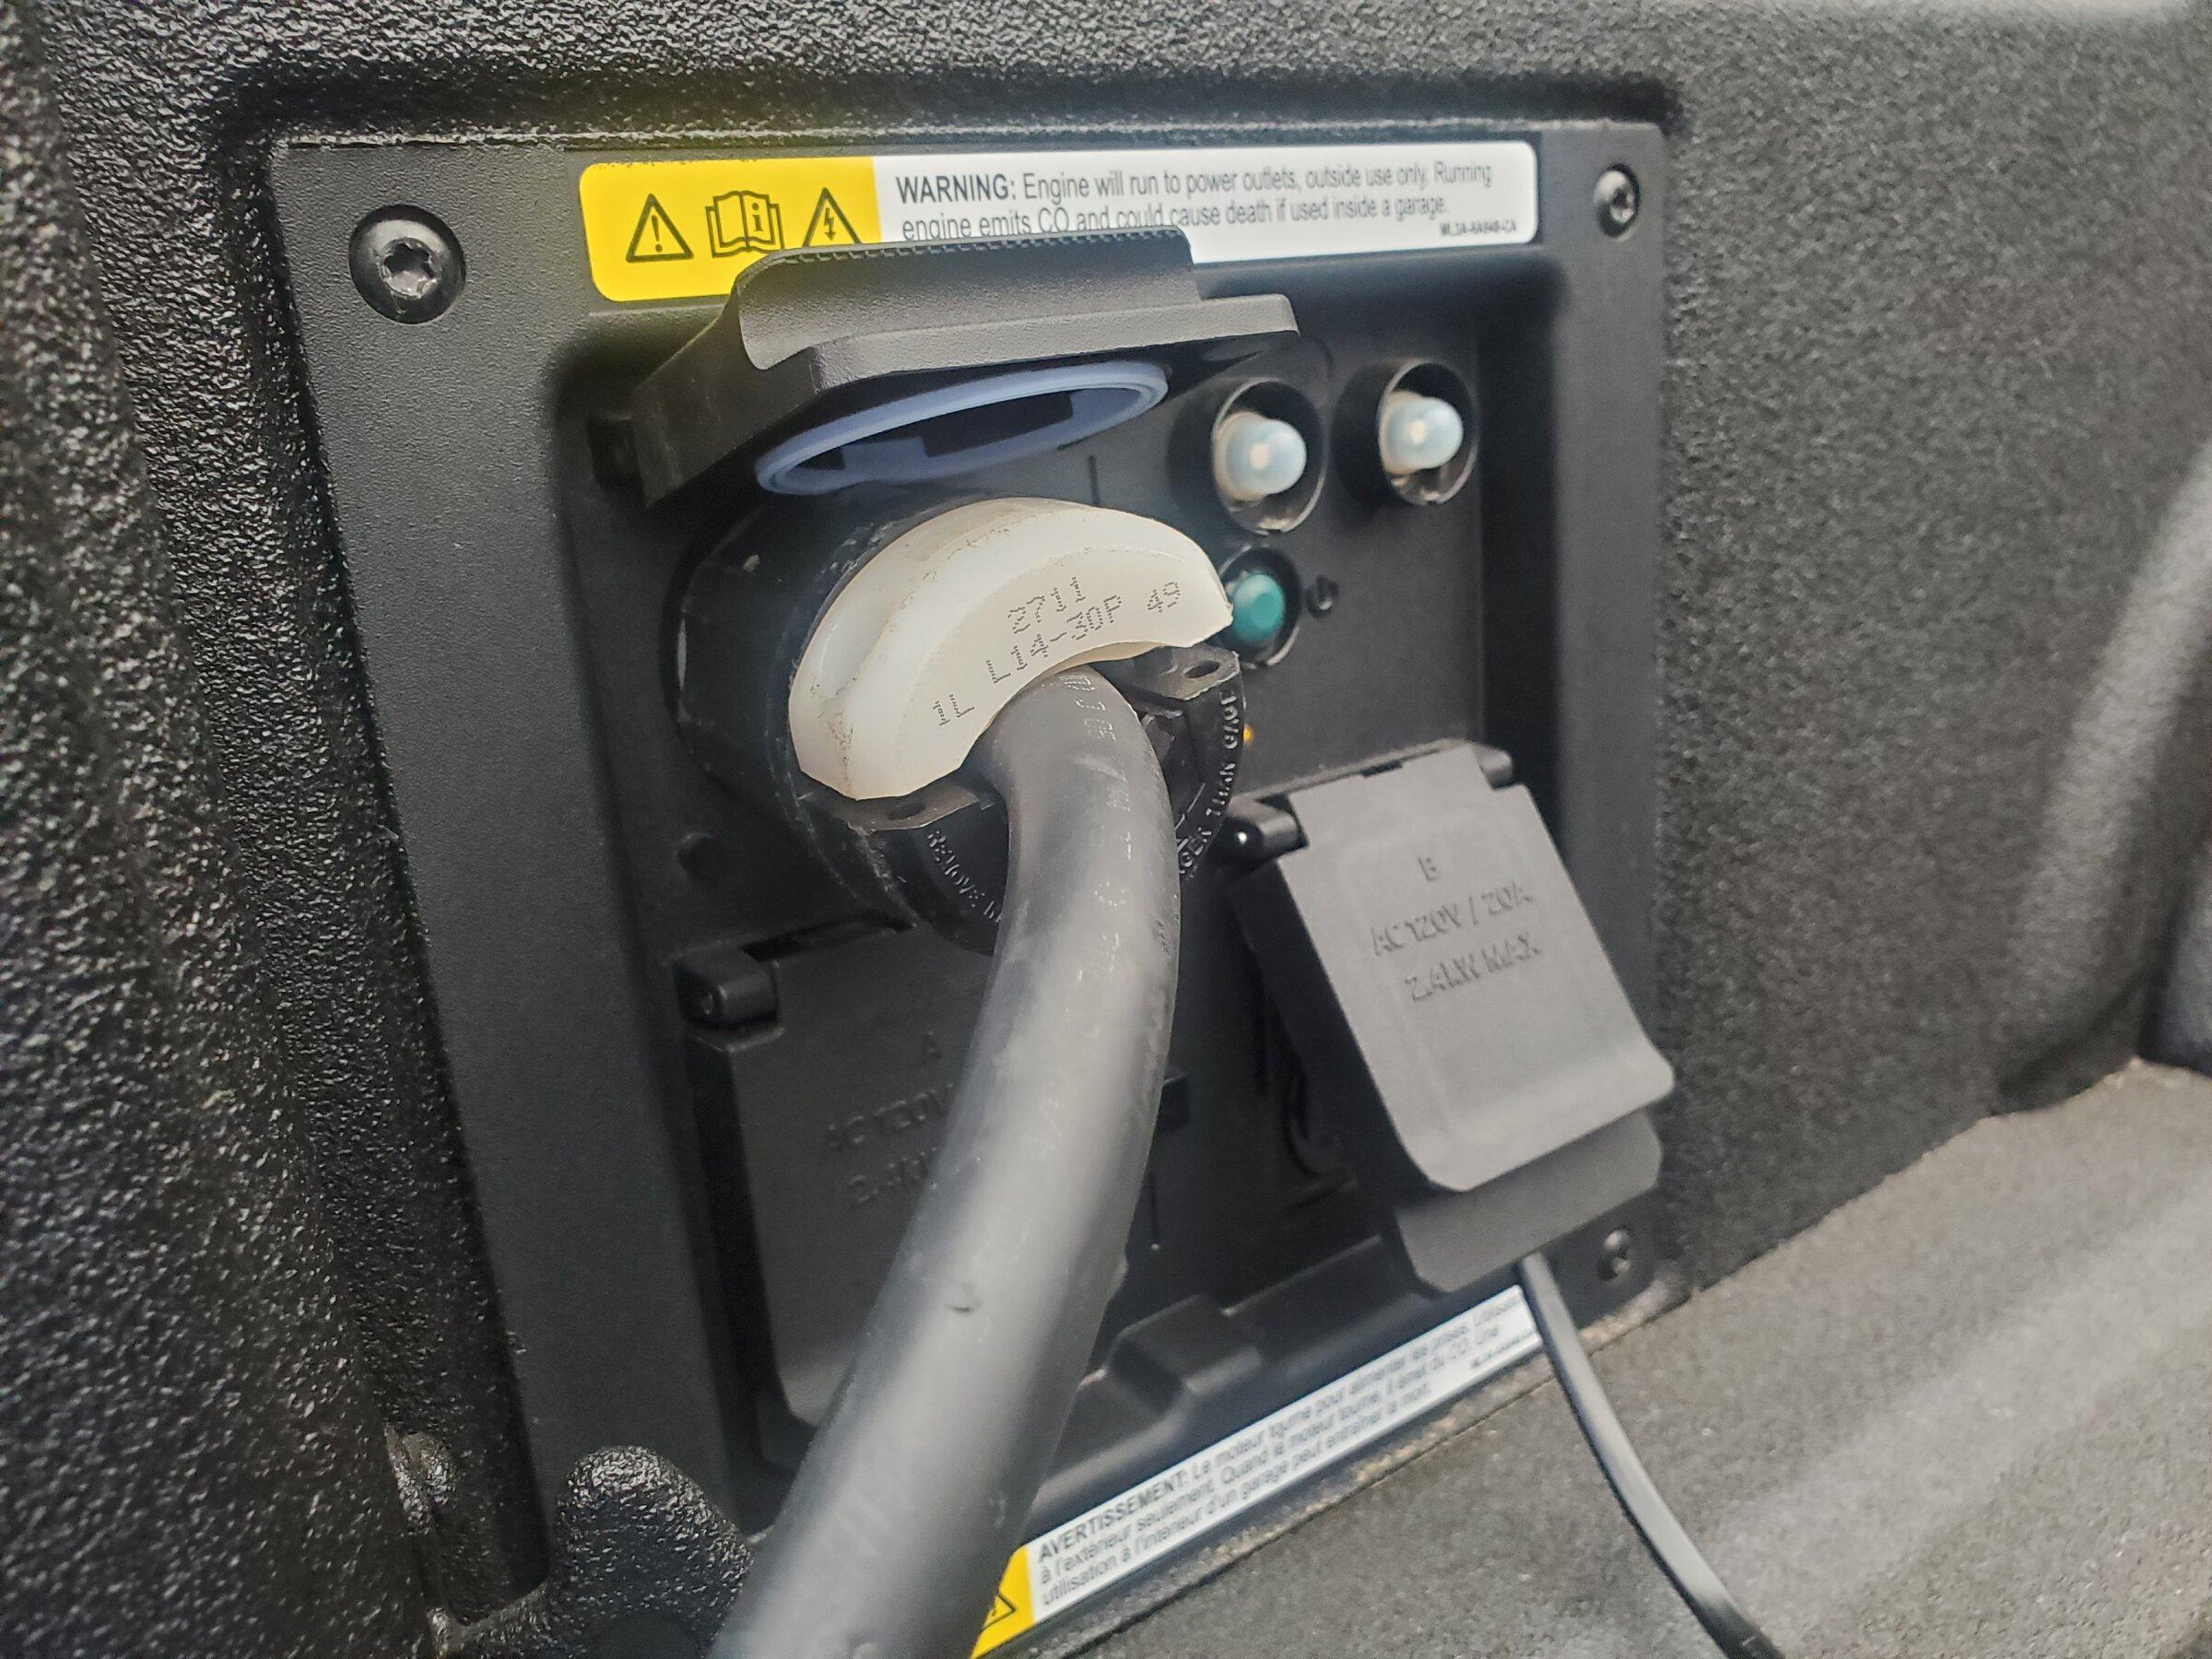 Ford F-150 Lightning Can I charge my Model 3 from my Lightning? 20210920_164858